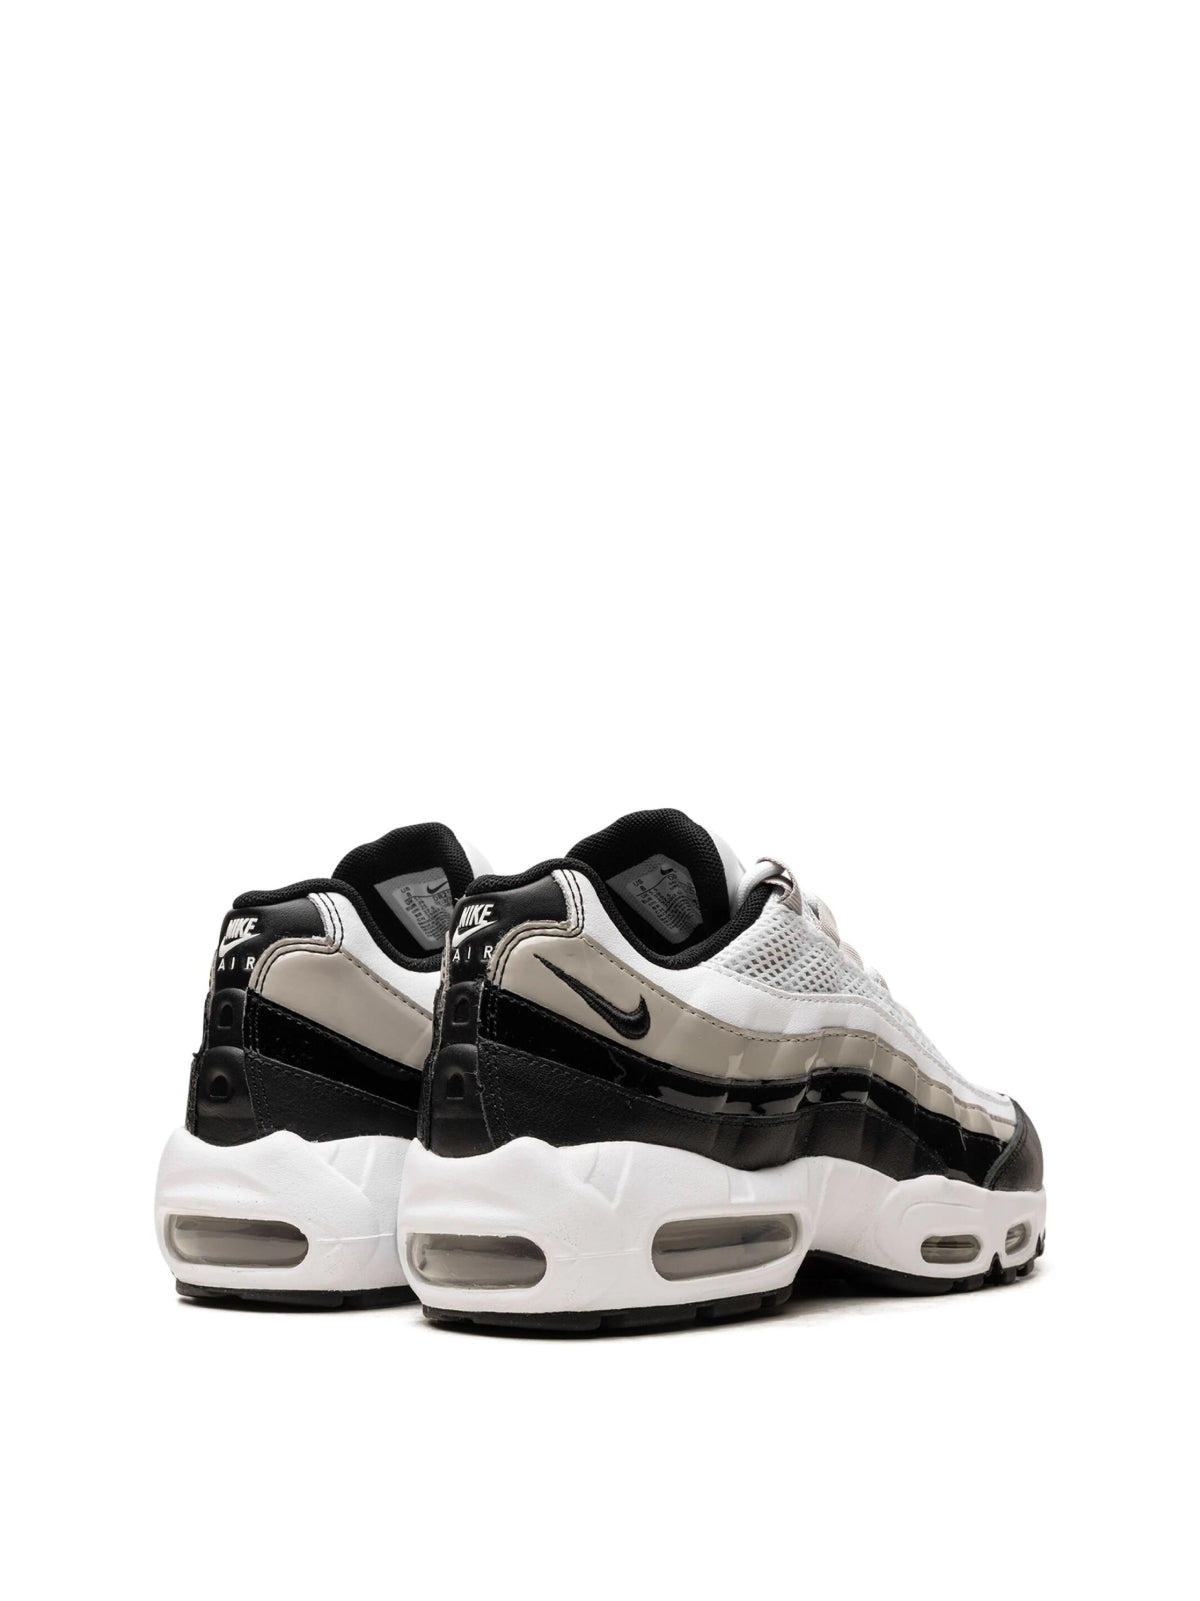 Nike-OUTLET-SALE-Air Max 95 Sneakers-ARCHIVIST